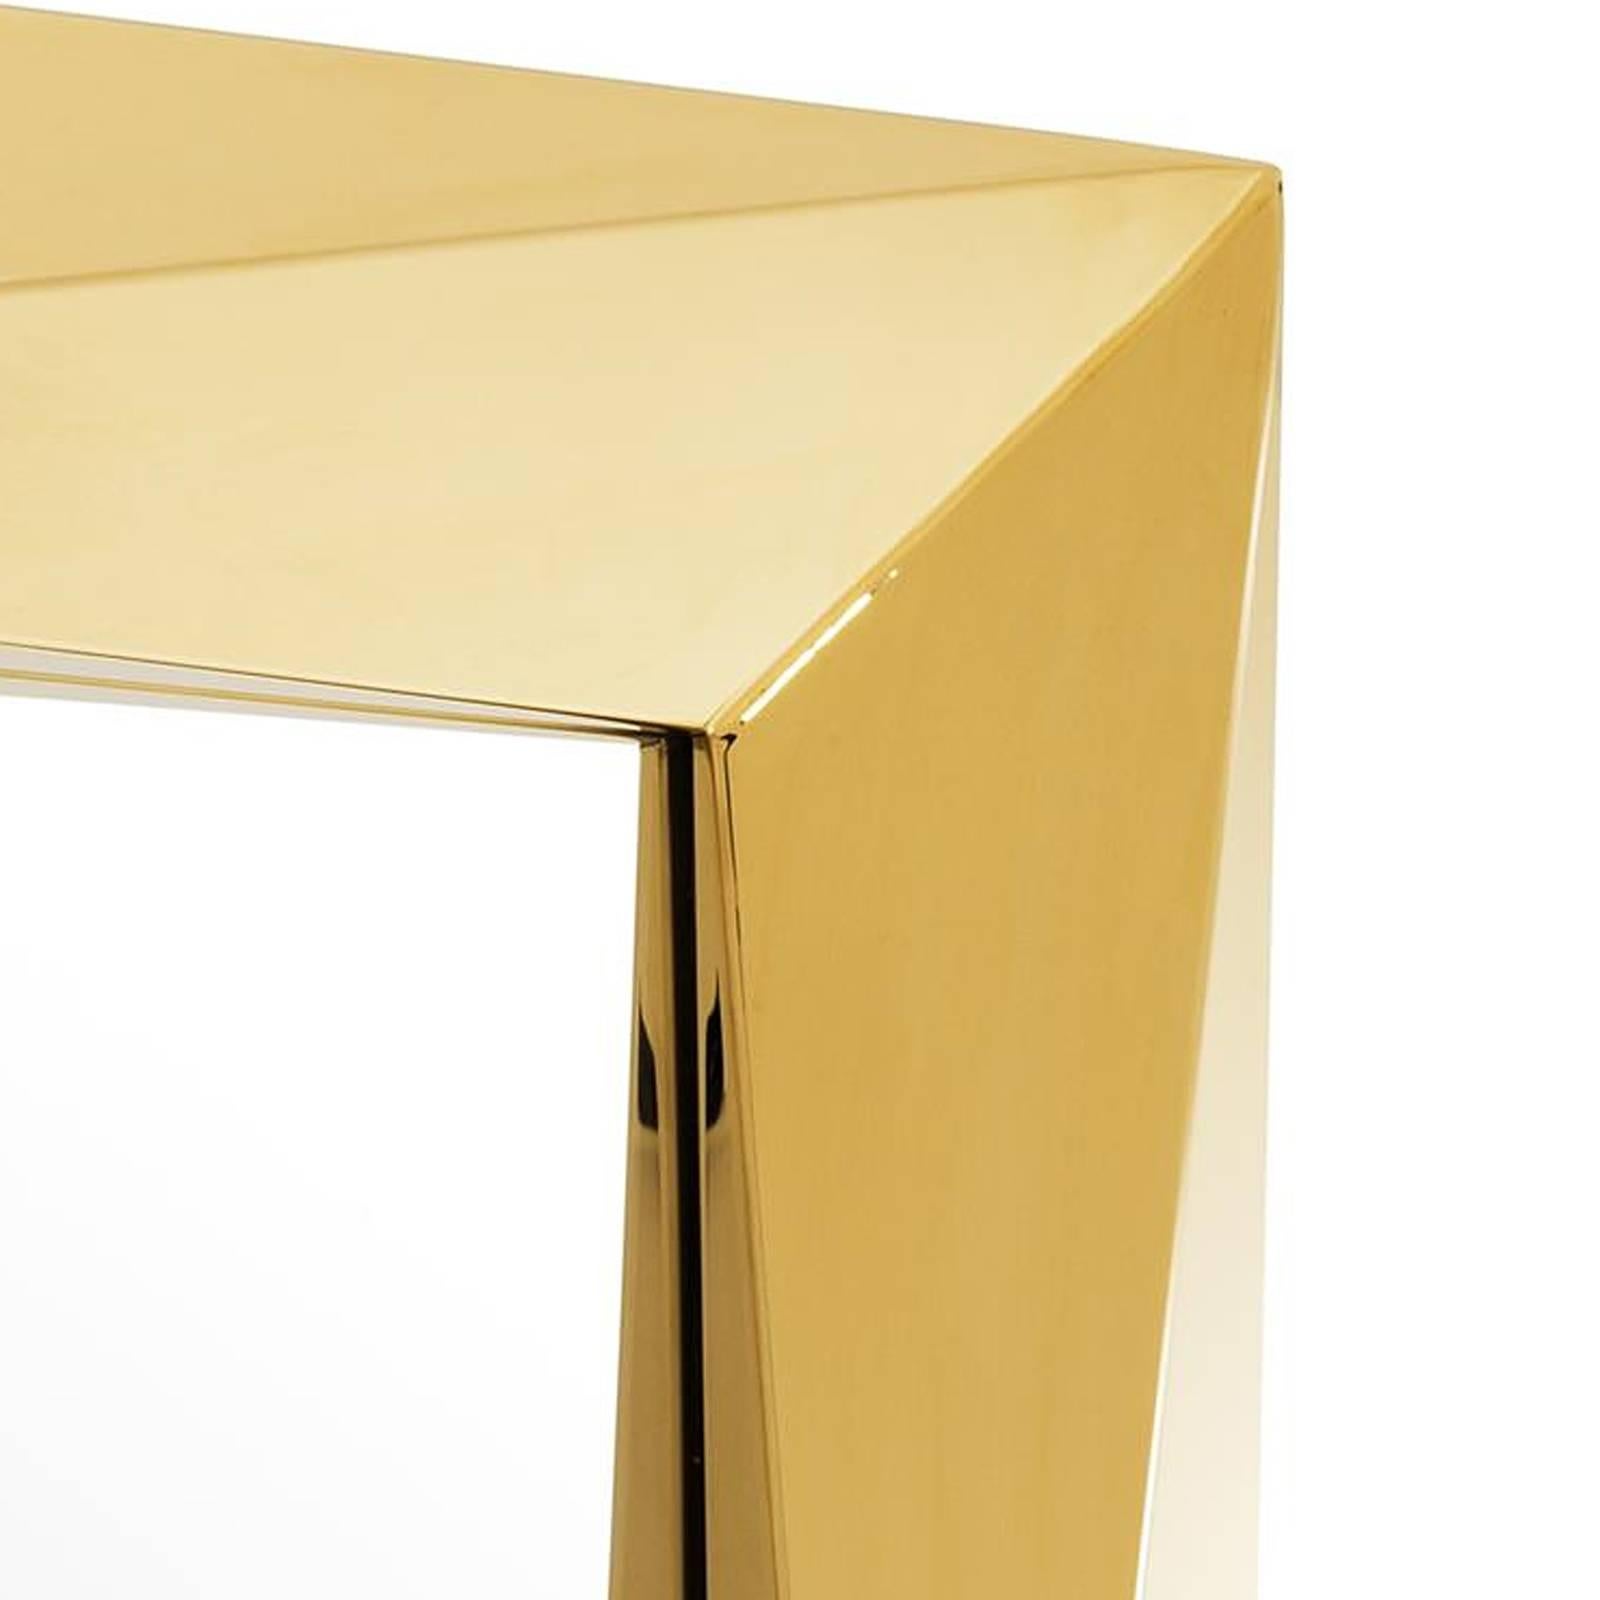 Contemporary Axis Square Mirror in Gold Finish or in Polished Stainless Steel